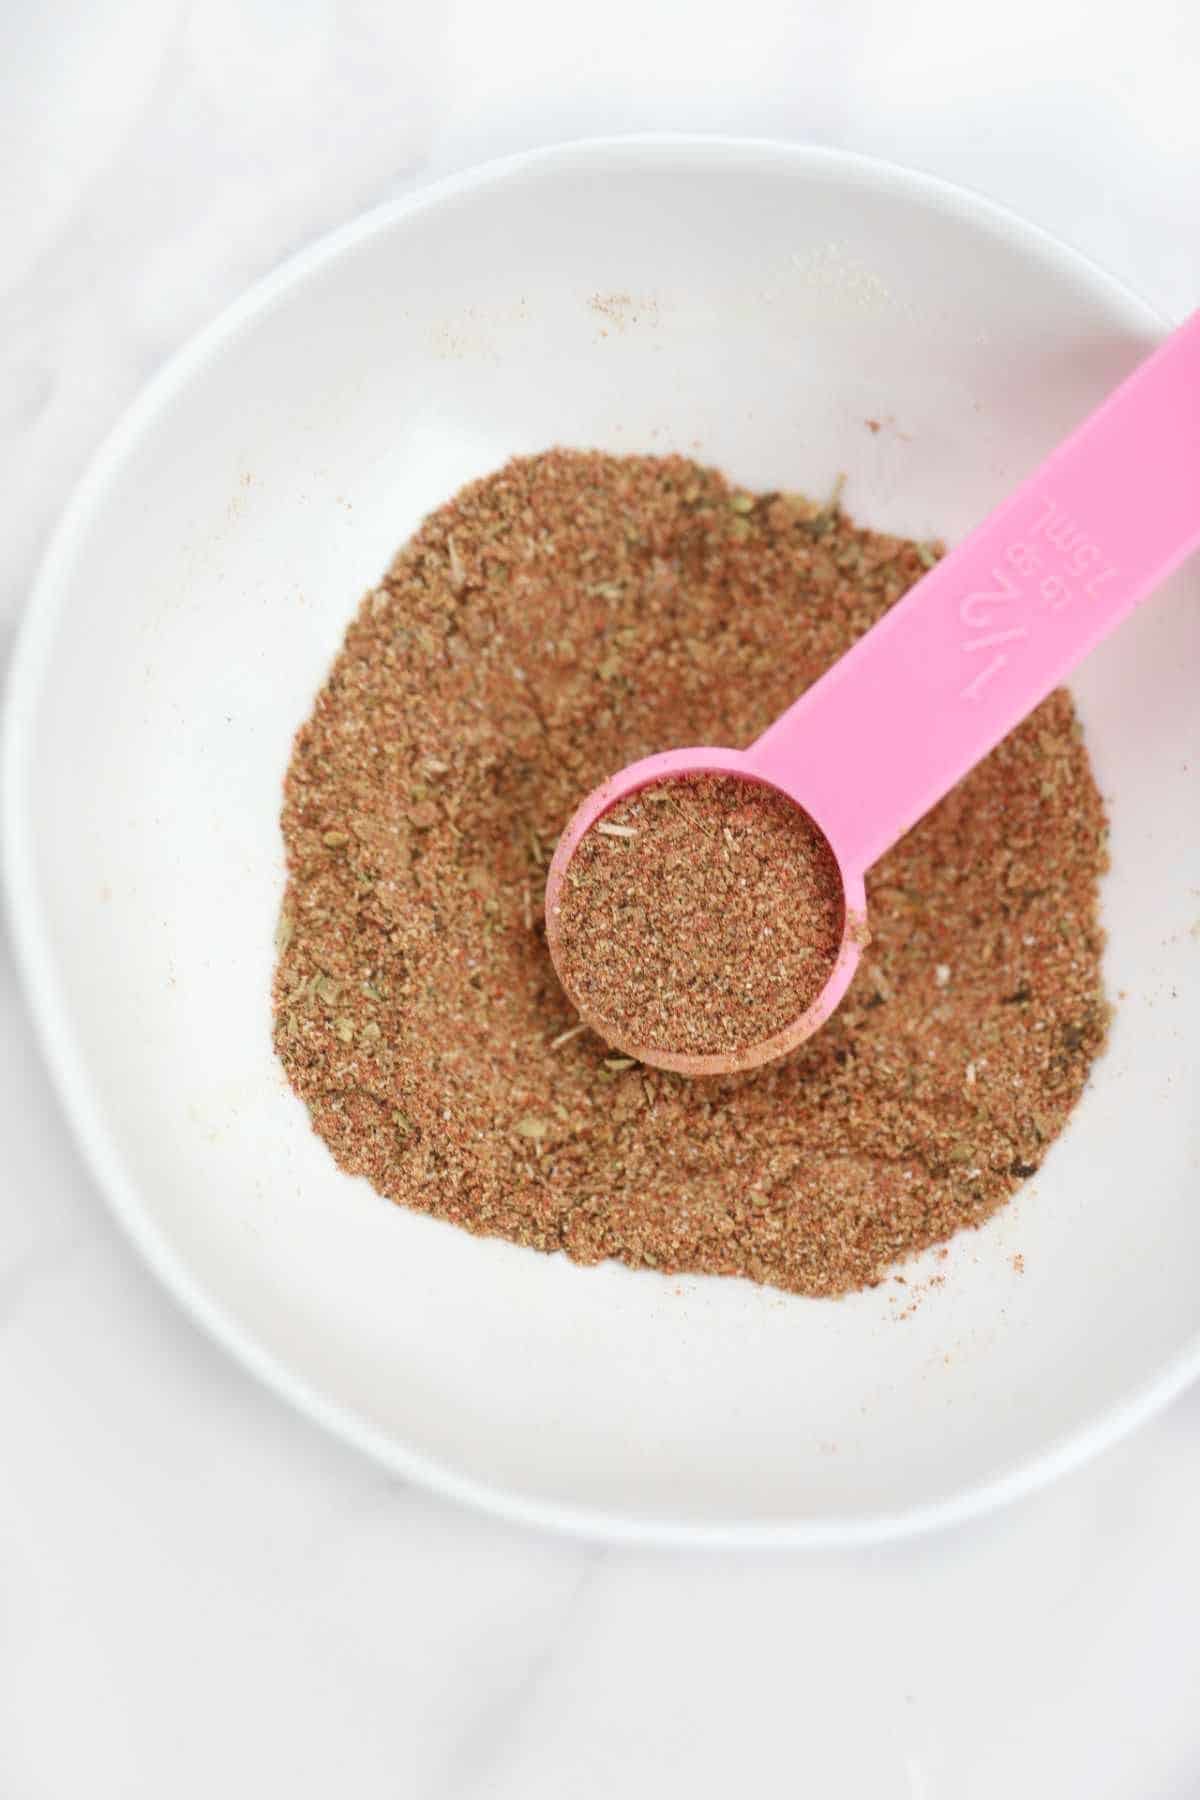 steak dry rub in a small mixing bowl.